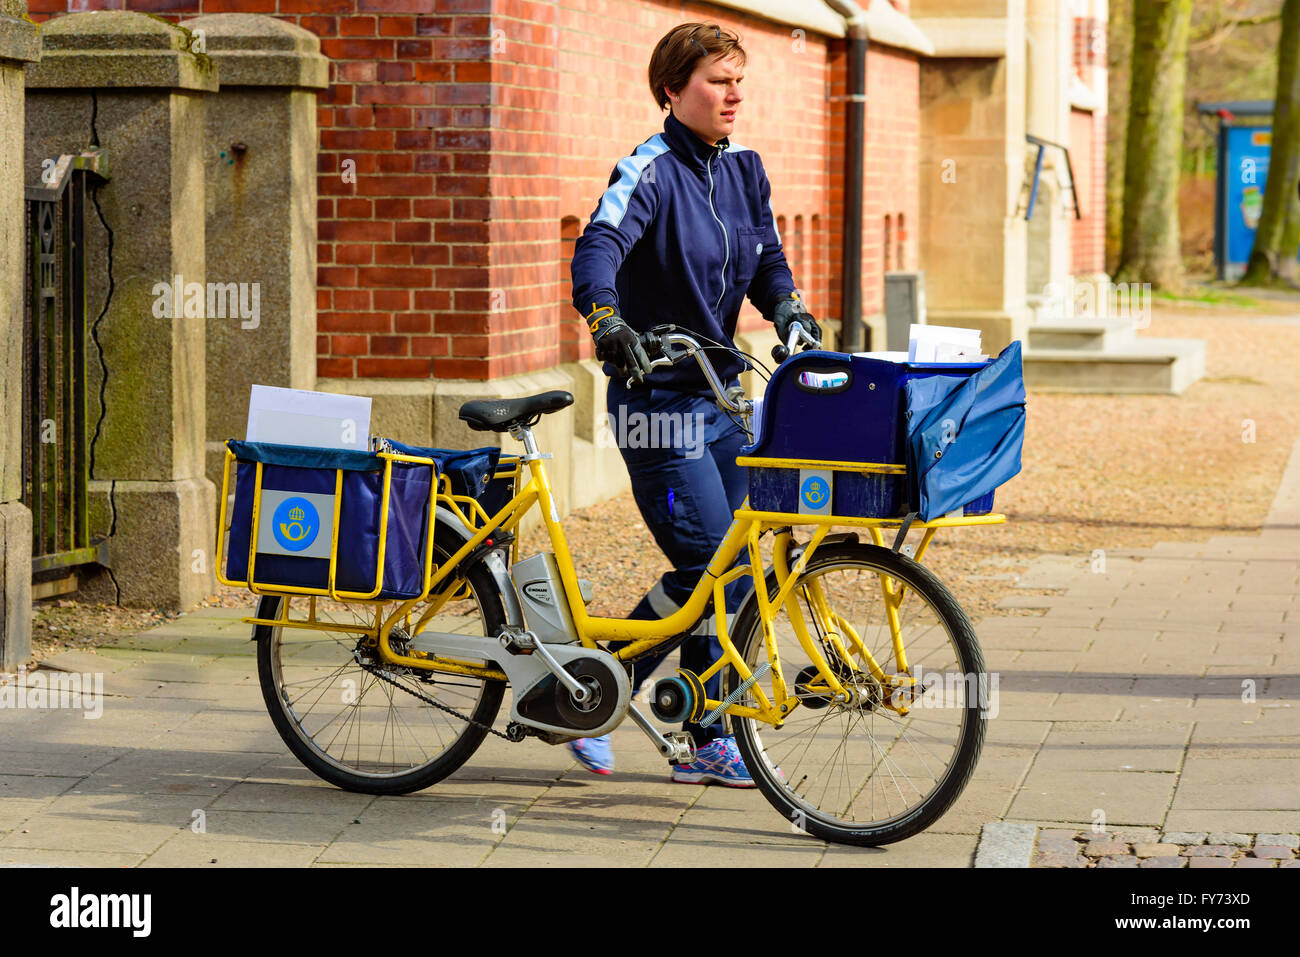 Trelleborg, Sweden . April 12, 2016: Female mailman pushing a bike full of mail and letters across the pavement. Stock Photo